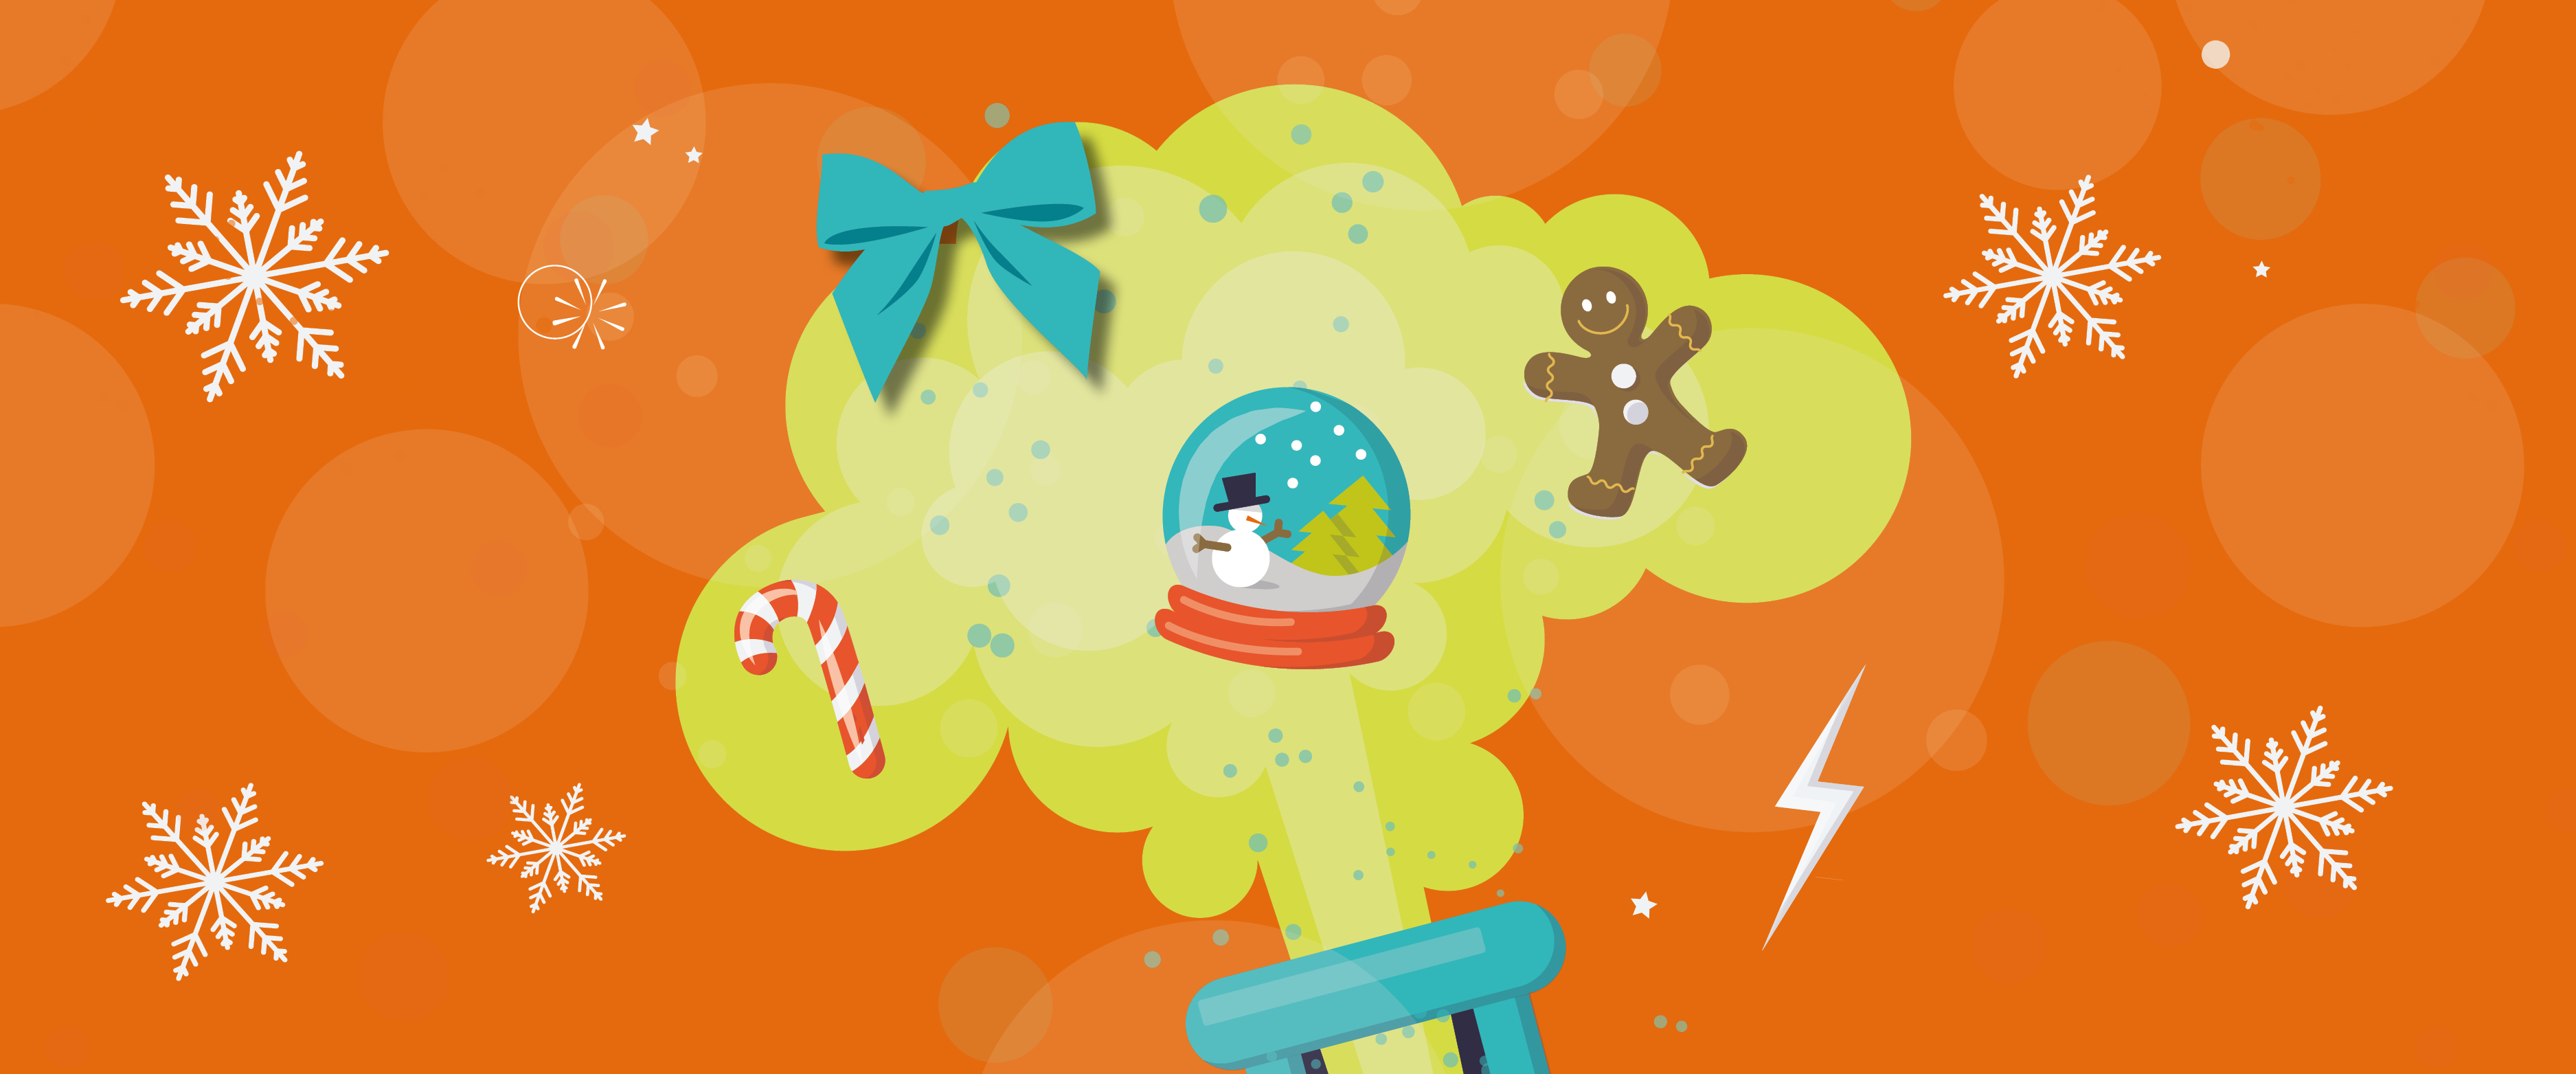 An illustration of an explosion which contains a snow globe, gingerbread man, bow and snowflakes